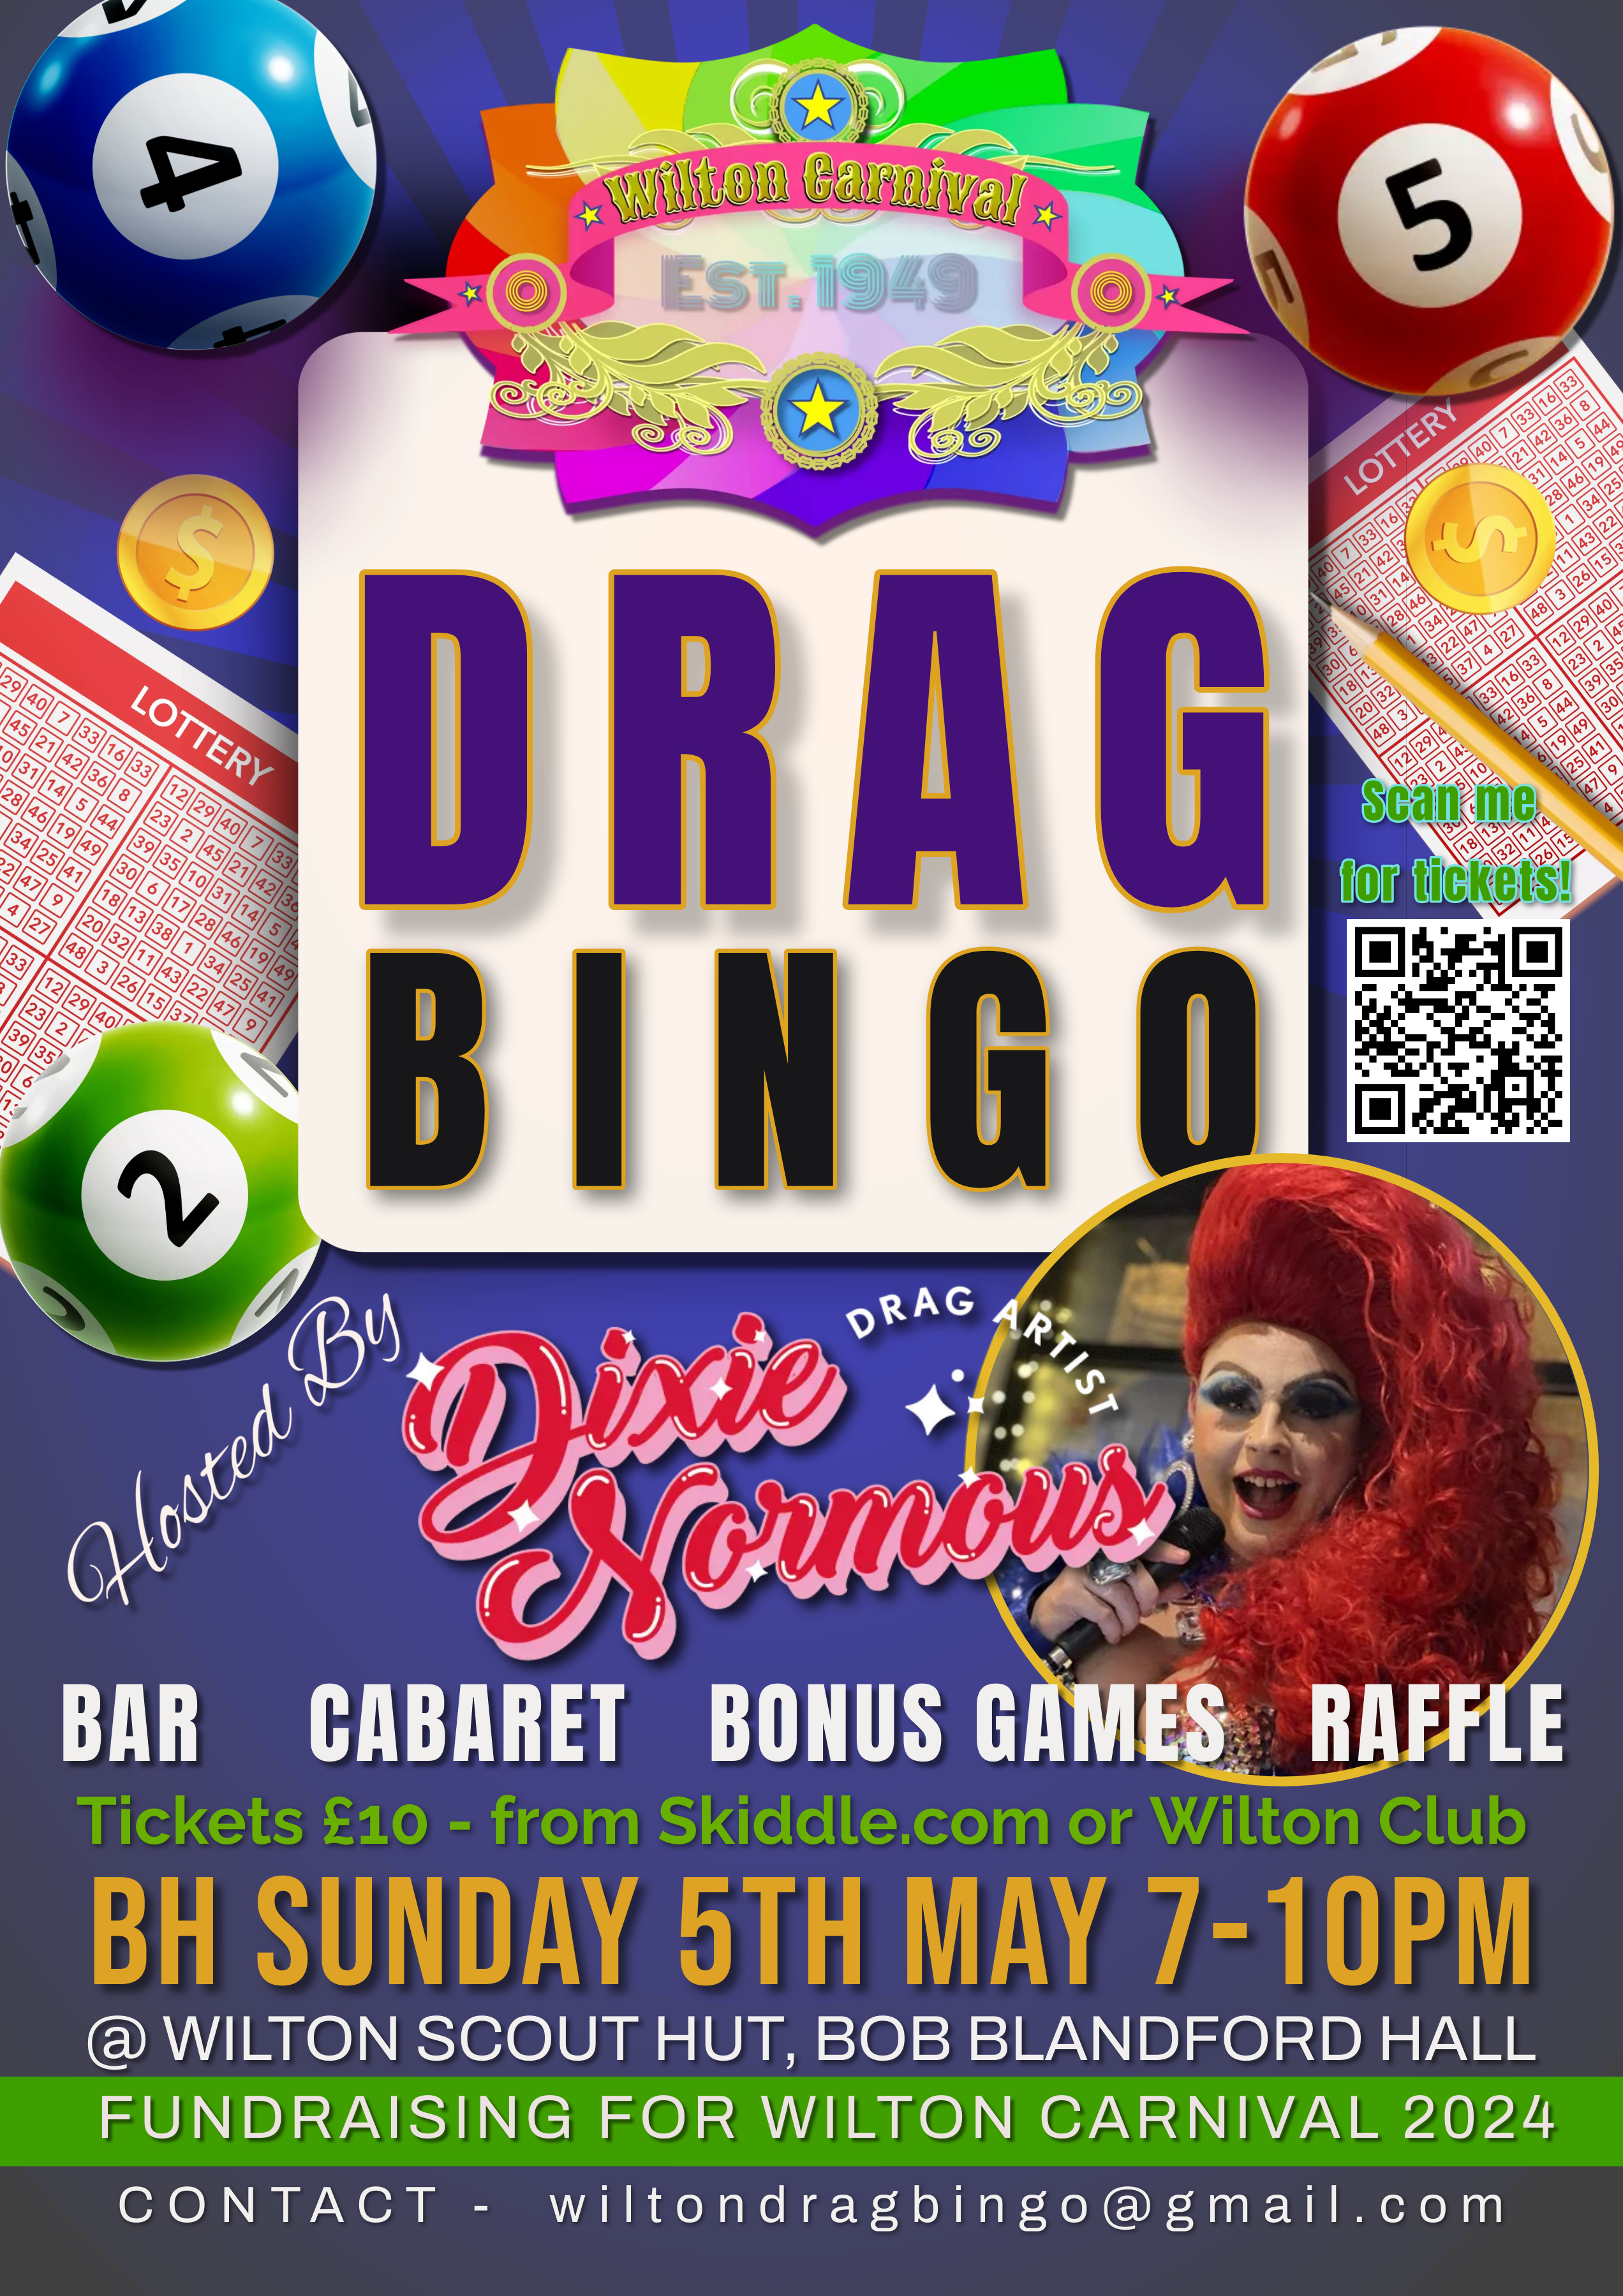 Drag Bingo and Live Cabaret with Dixie Normous